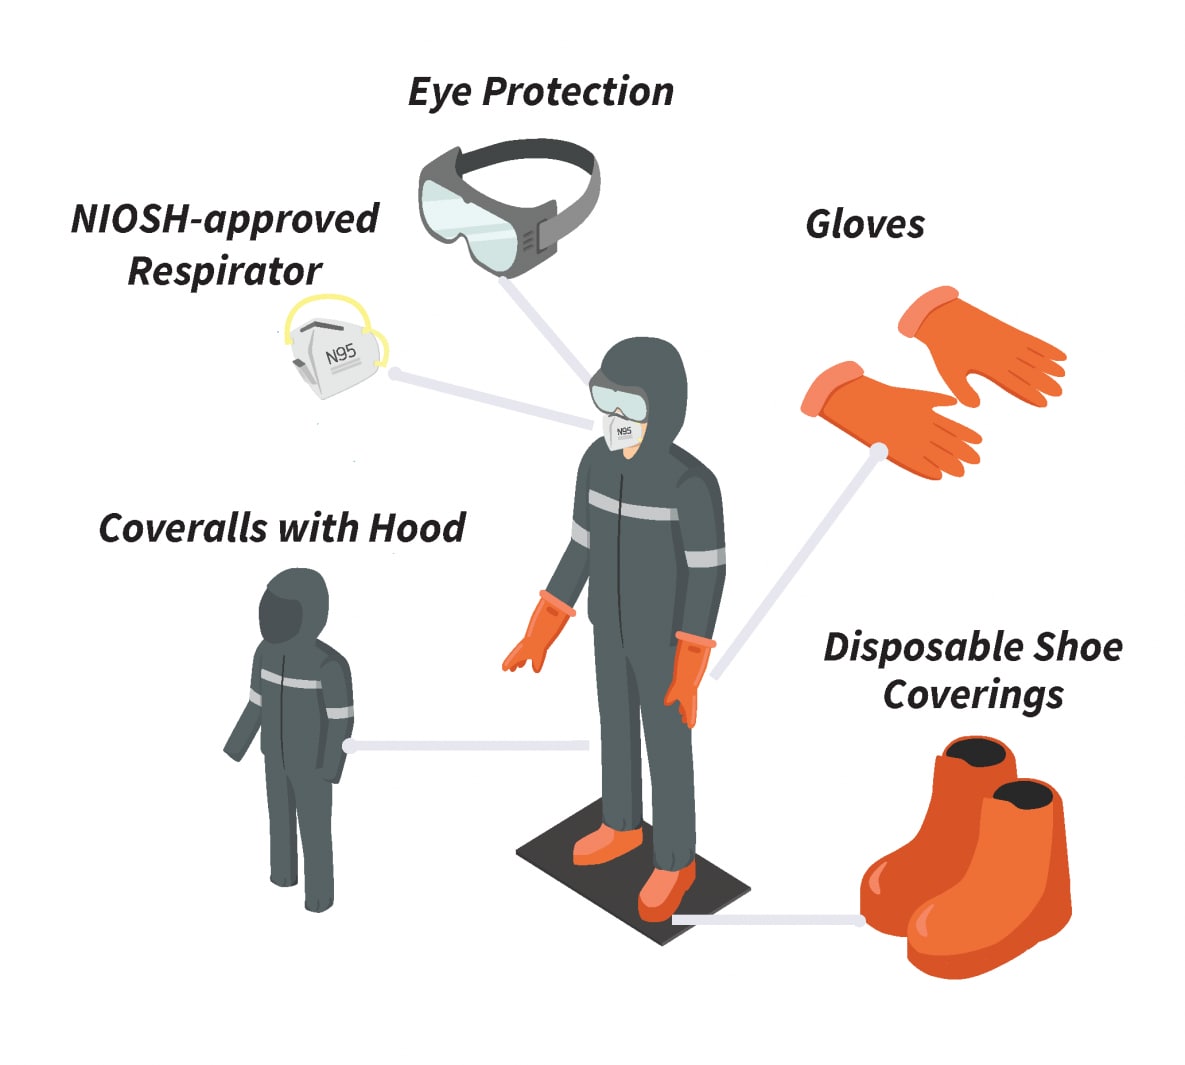 Person wearing eye protection, NIOSH approved respirator, gloves, coveralls with hood, and disposable shoe coverings.